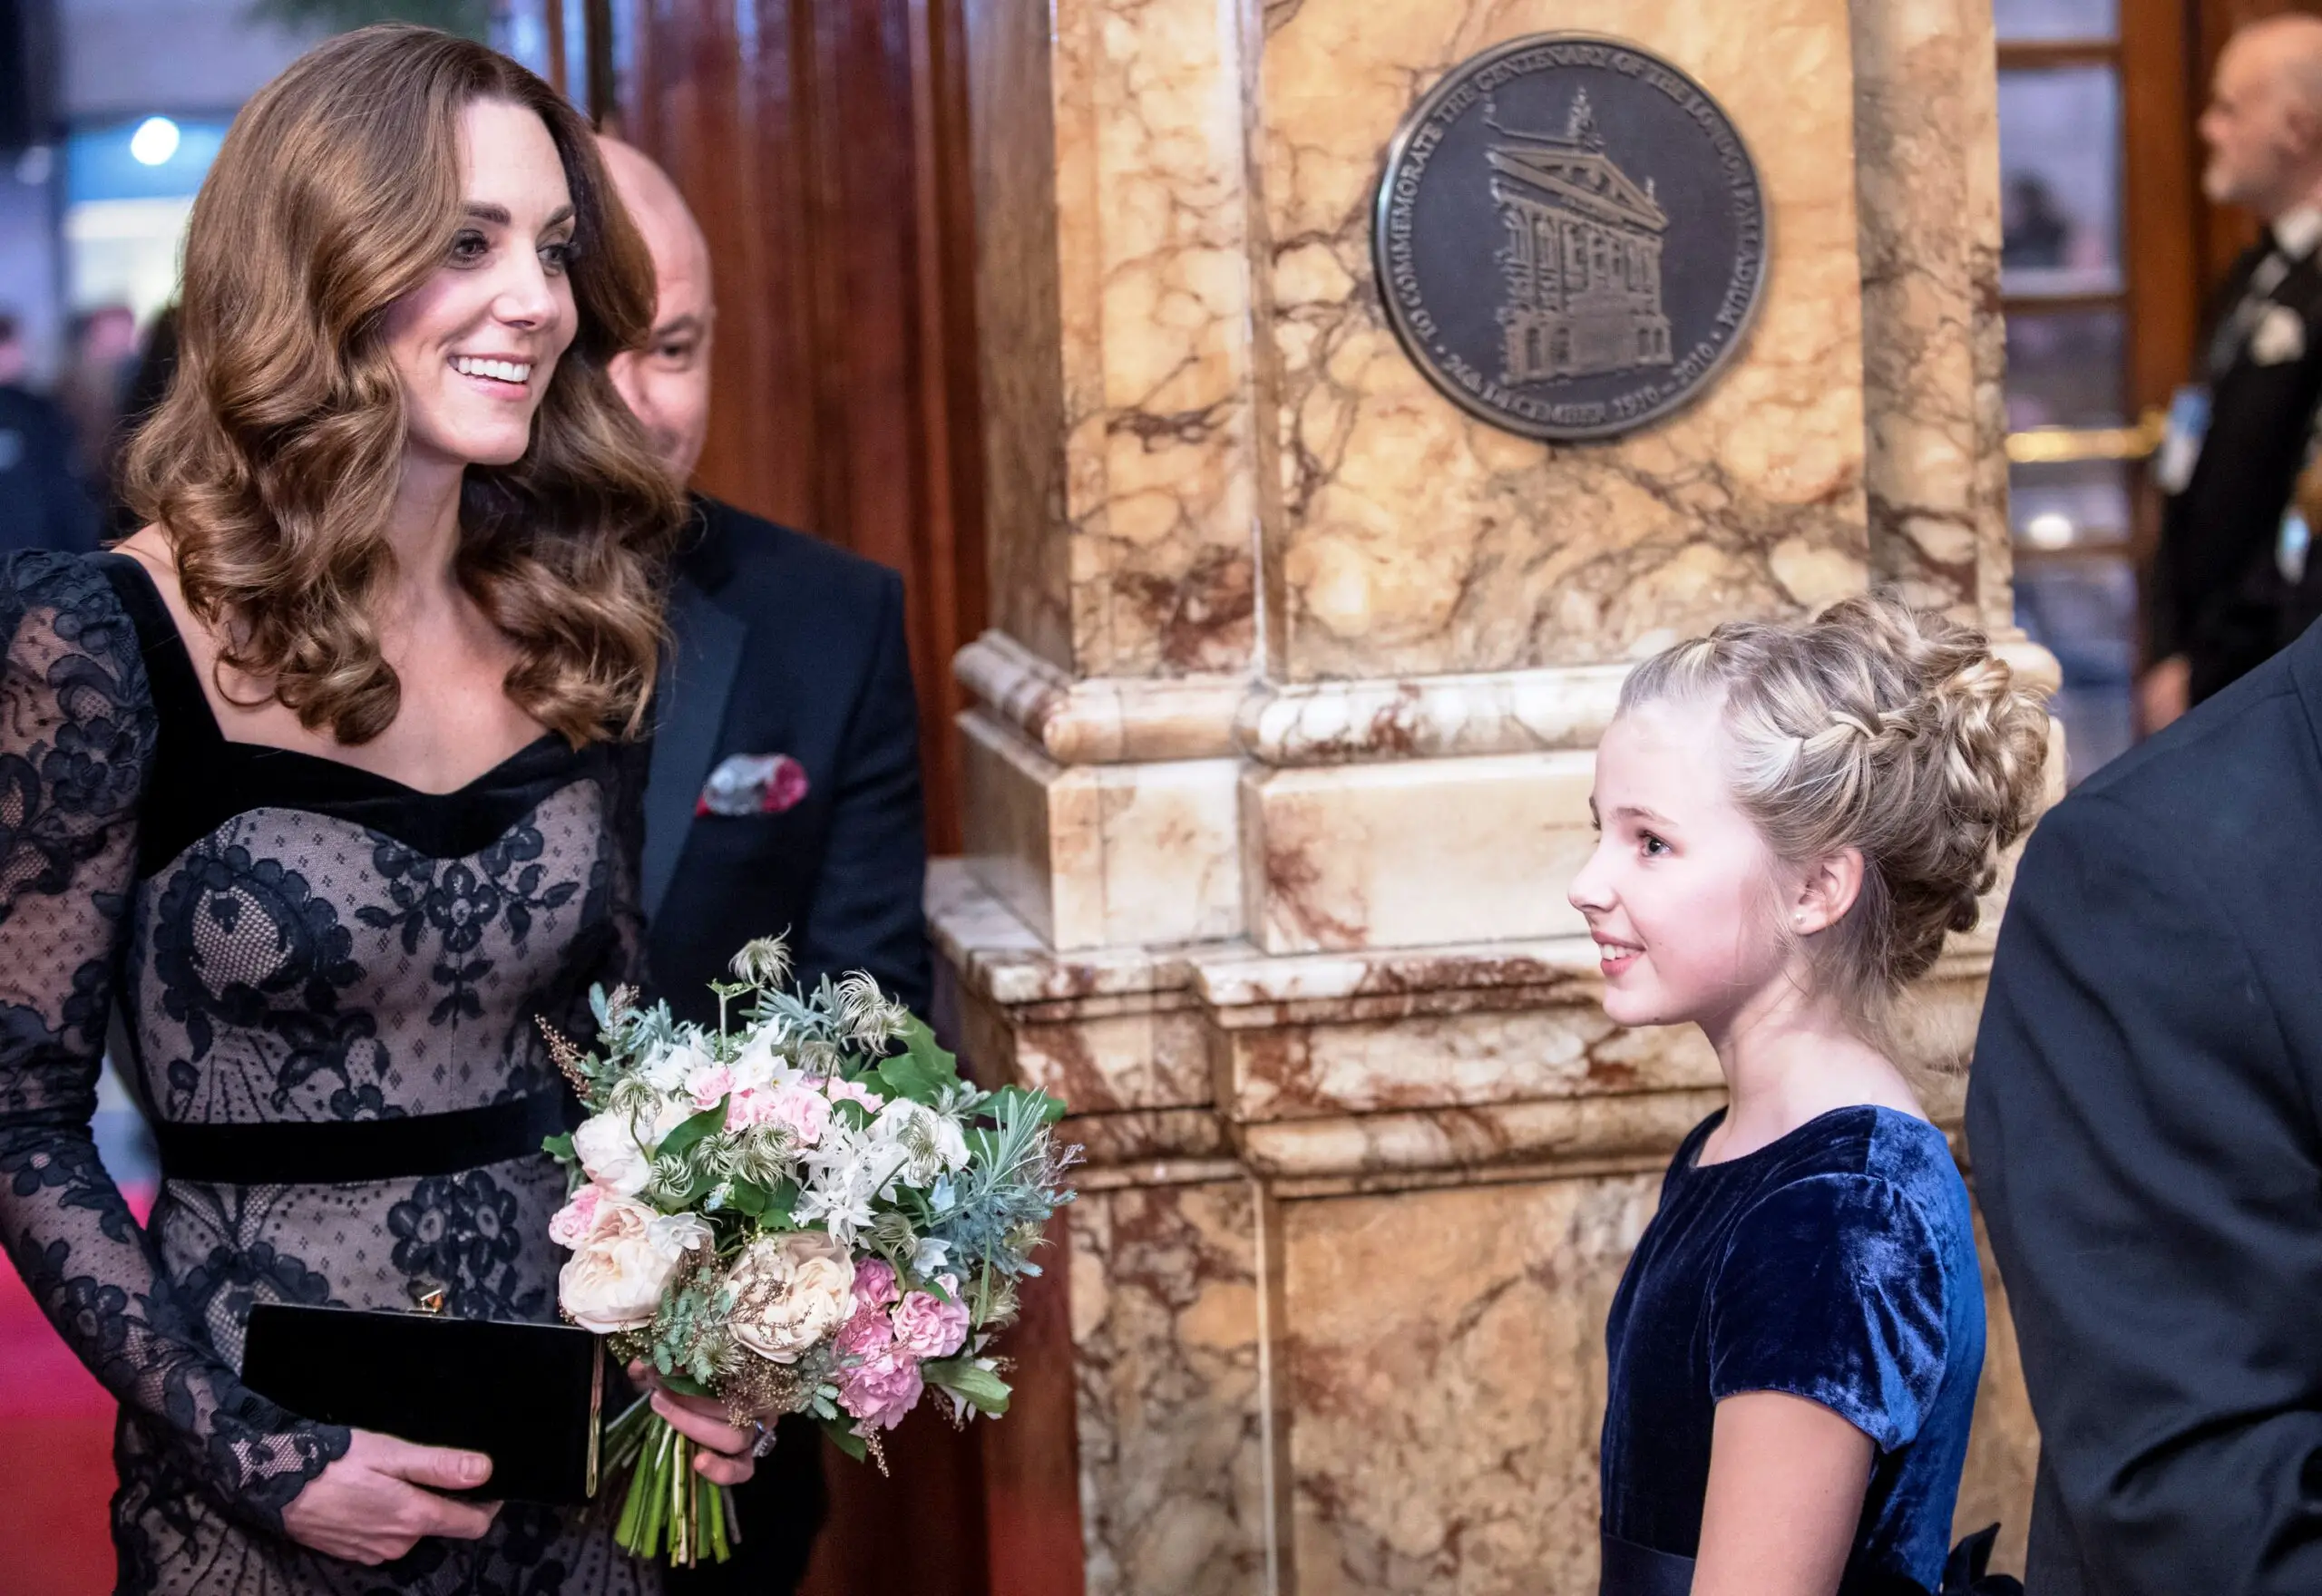 The Duchess of Cambridge received a beautiful bouquet upon arrival at The Royal Variety Performance in 2019